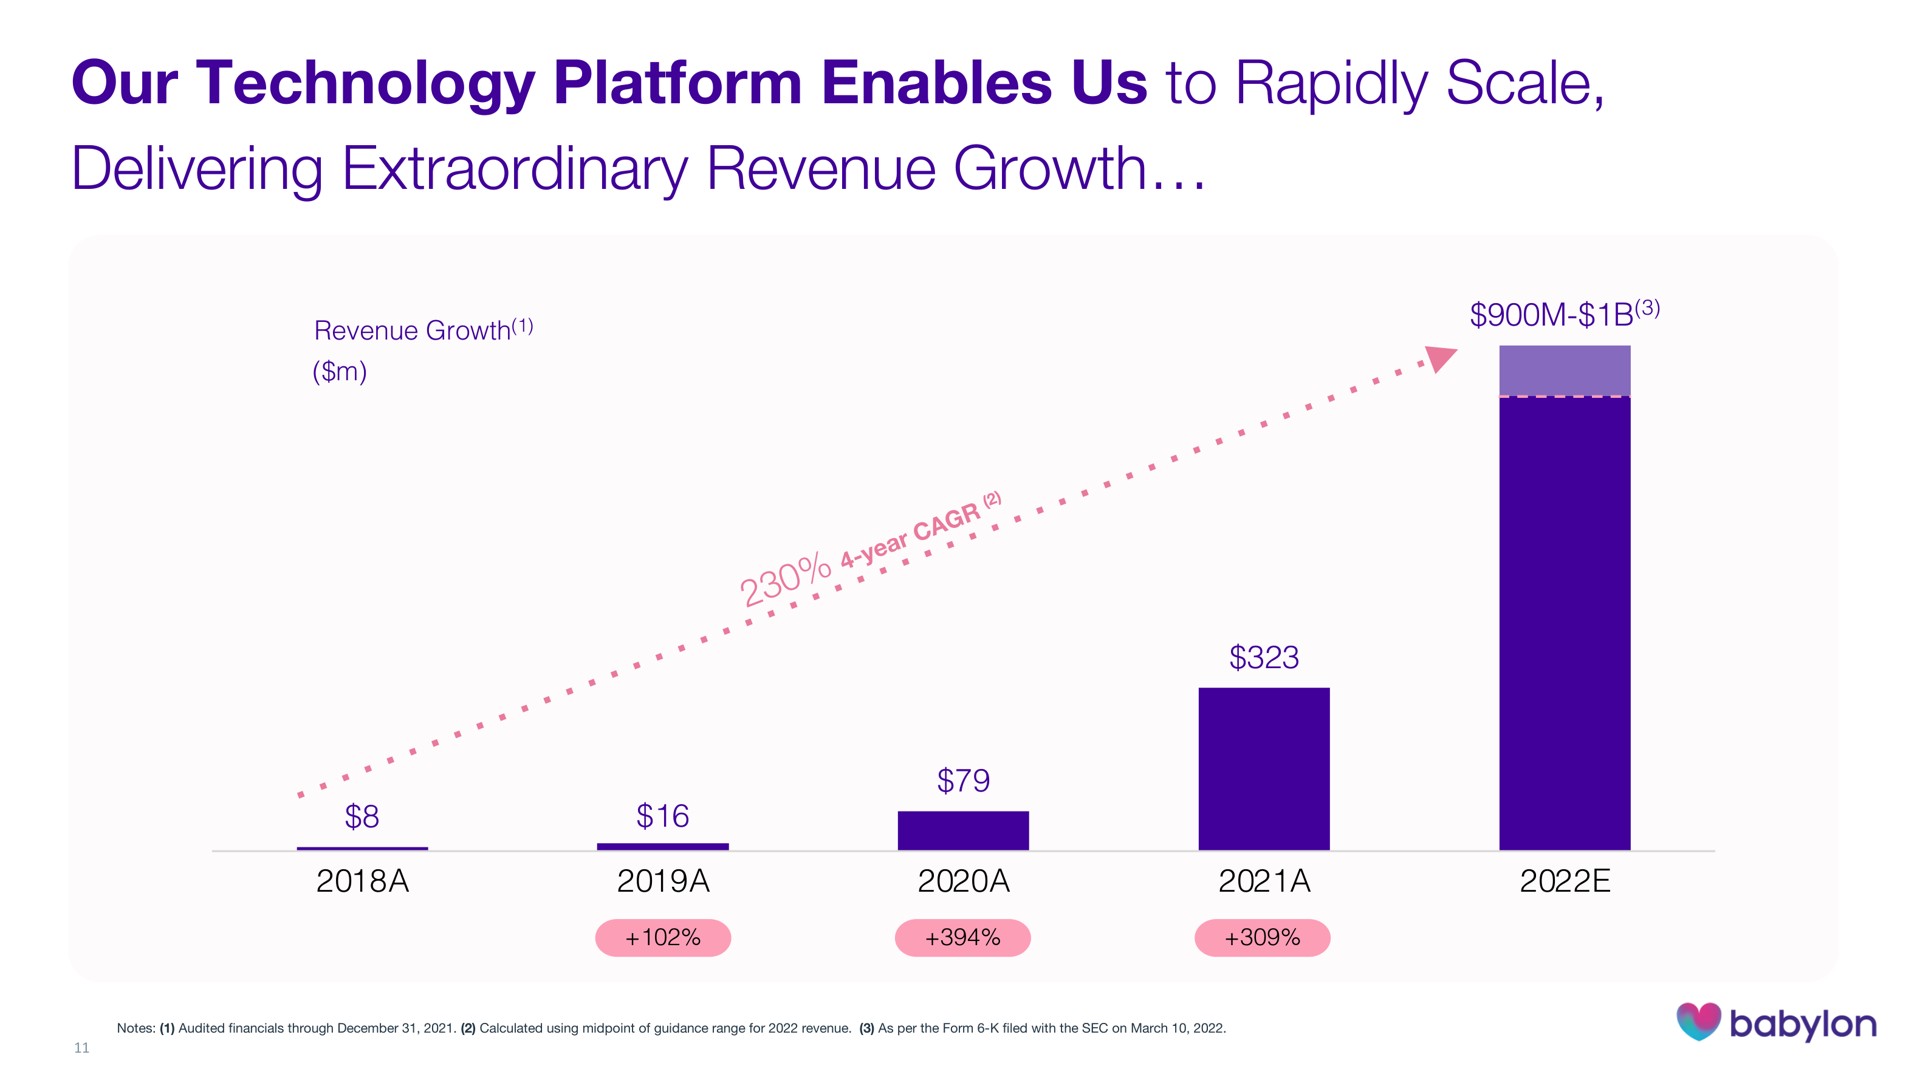 our technology platform enables us to rapidly scale delivering extraordinary revenue growth | Babylon